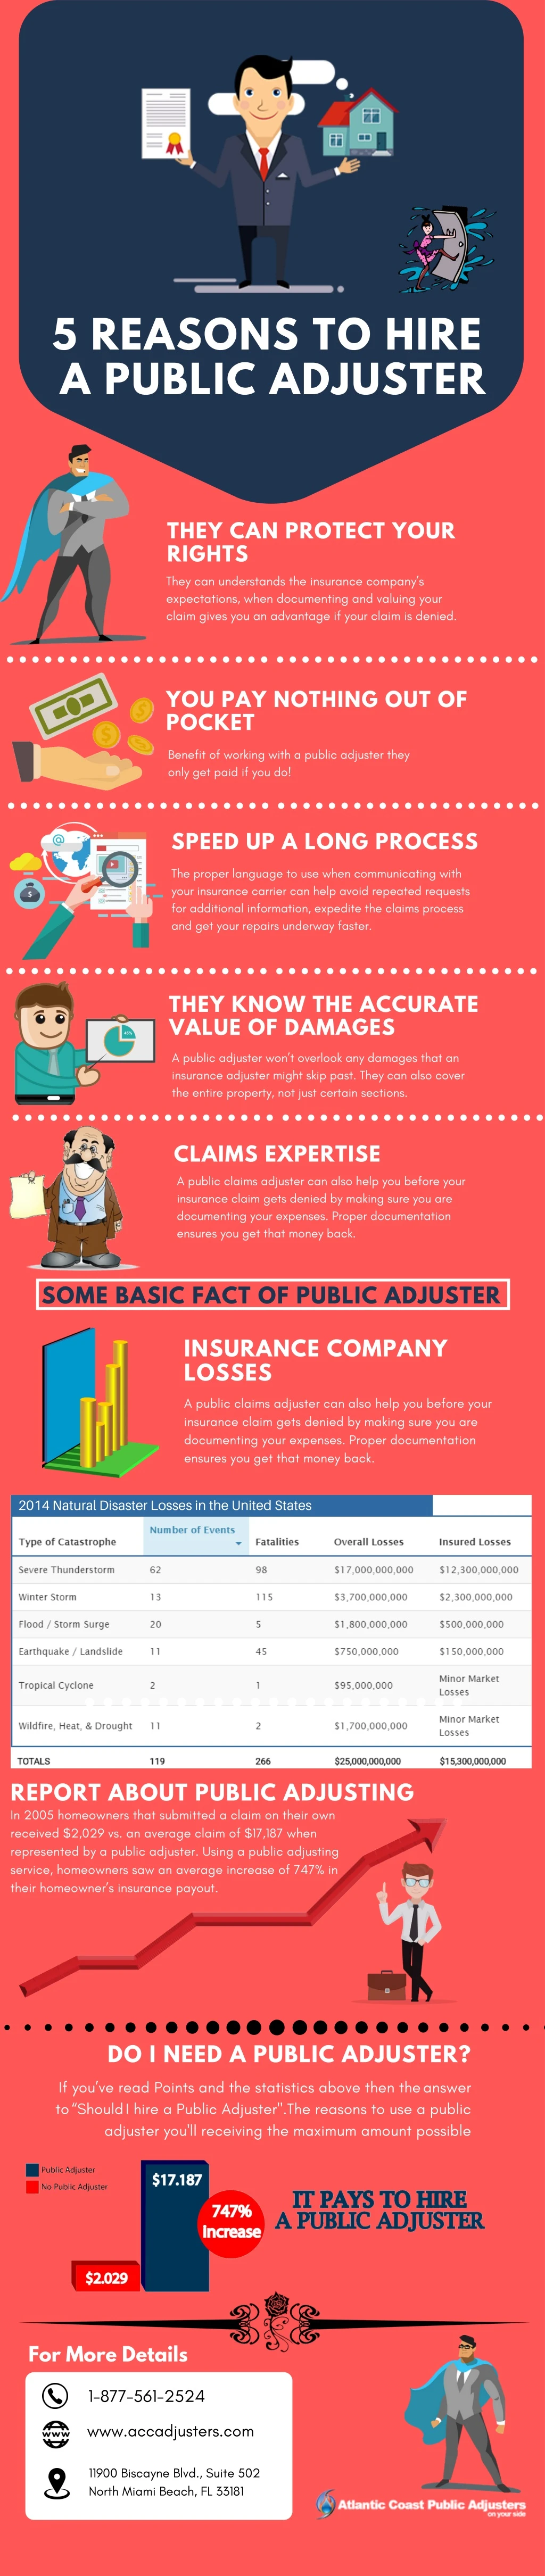 5 reasons to hire a public adjuster